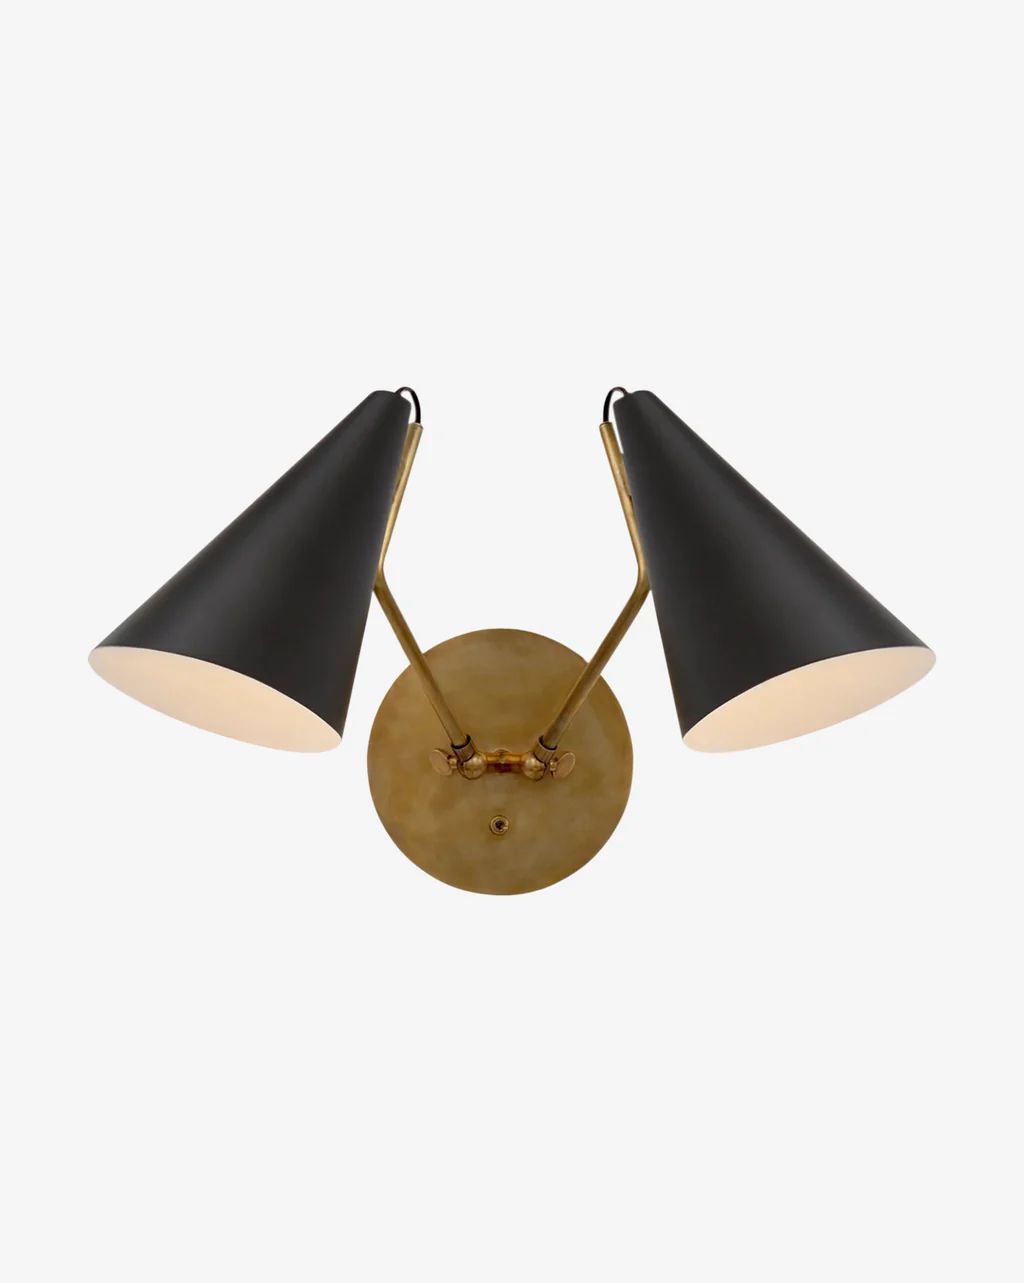 Clemente Double Sconce | McGee & Co.